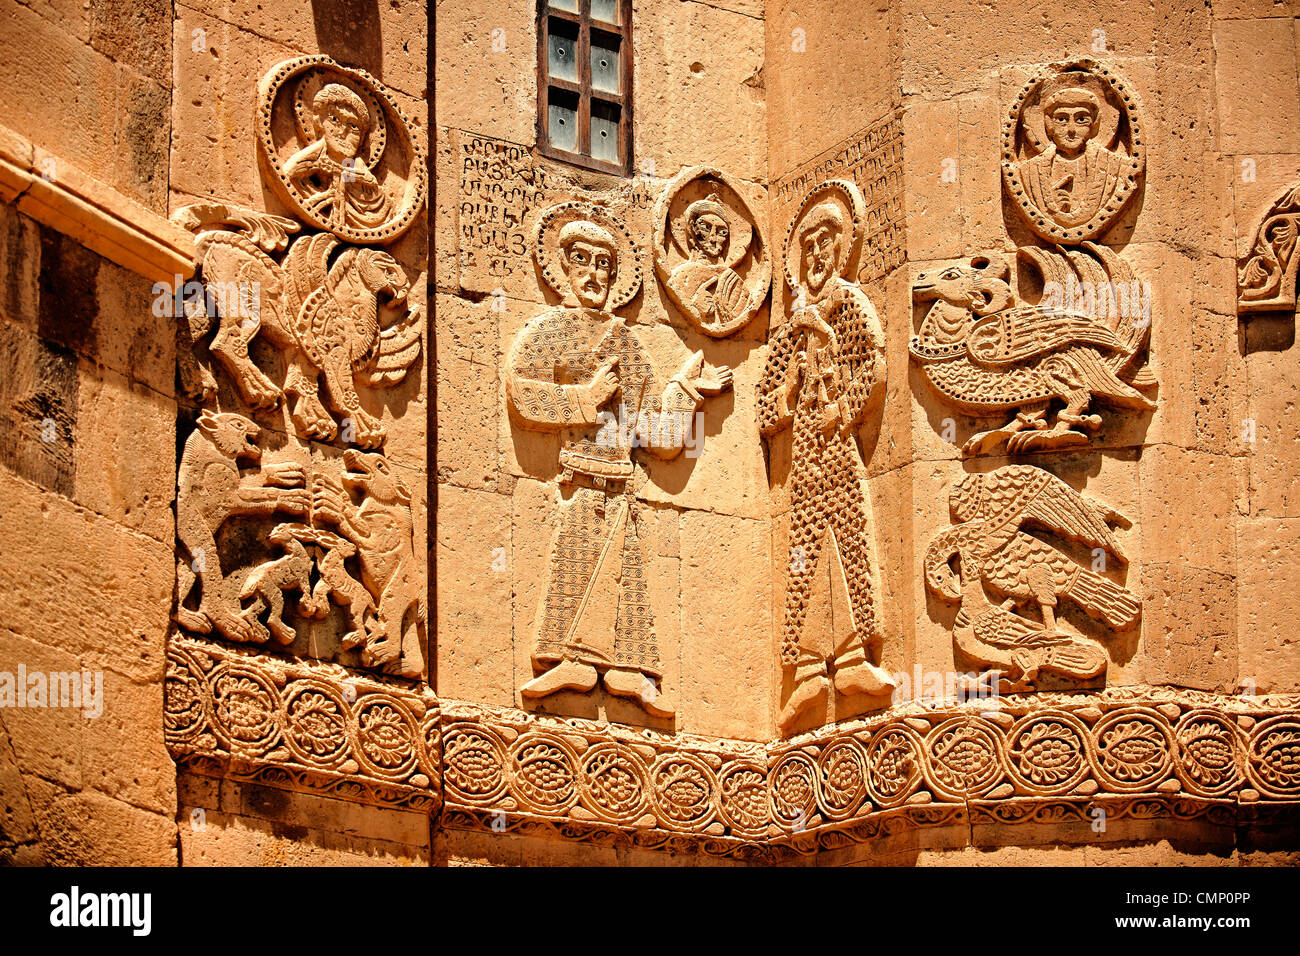 Armenian religious sculpture scenes from the Bible, Akdamar Cathedral of the Holy Cross, Lake Van Turkey Stock Photo